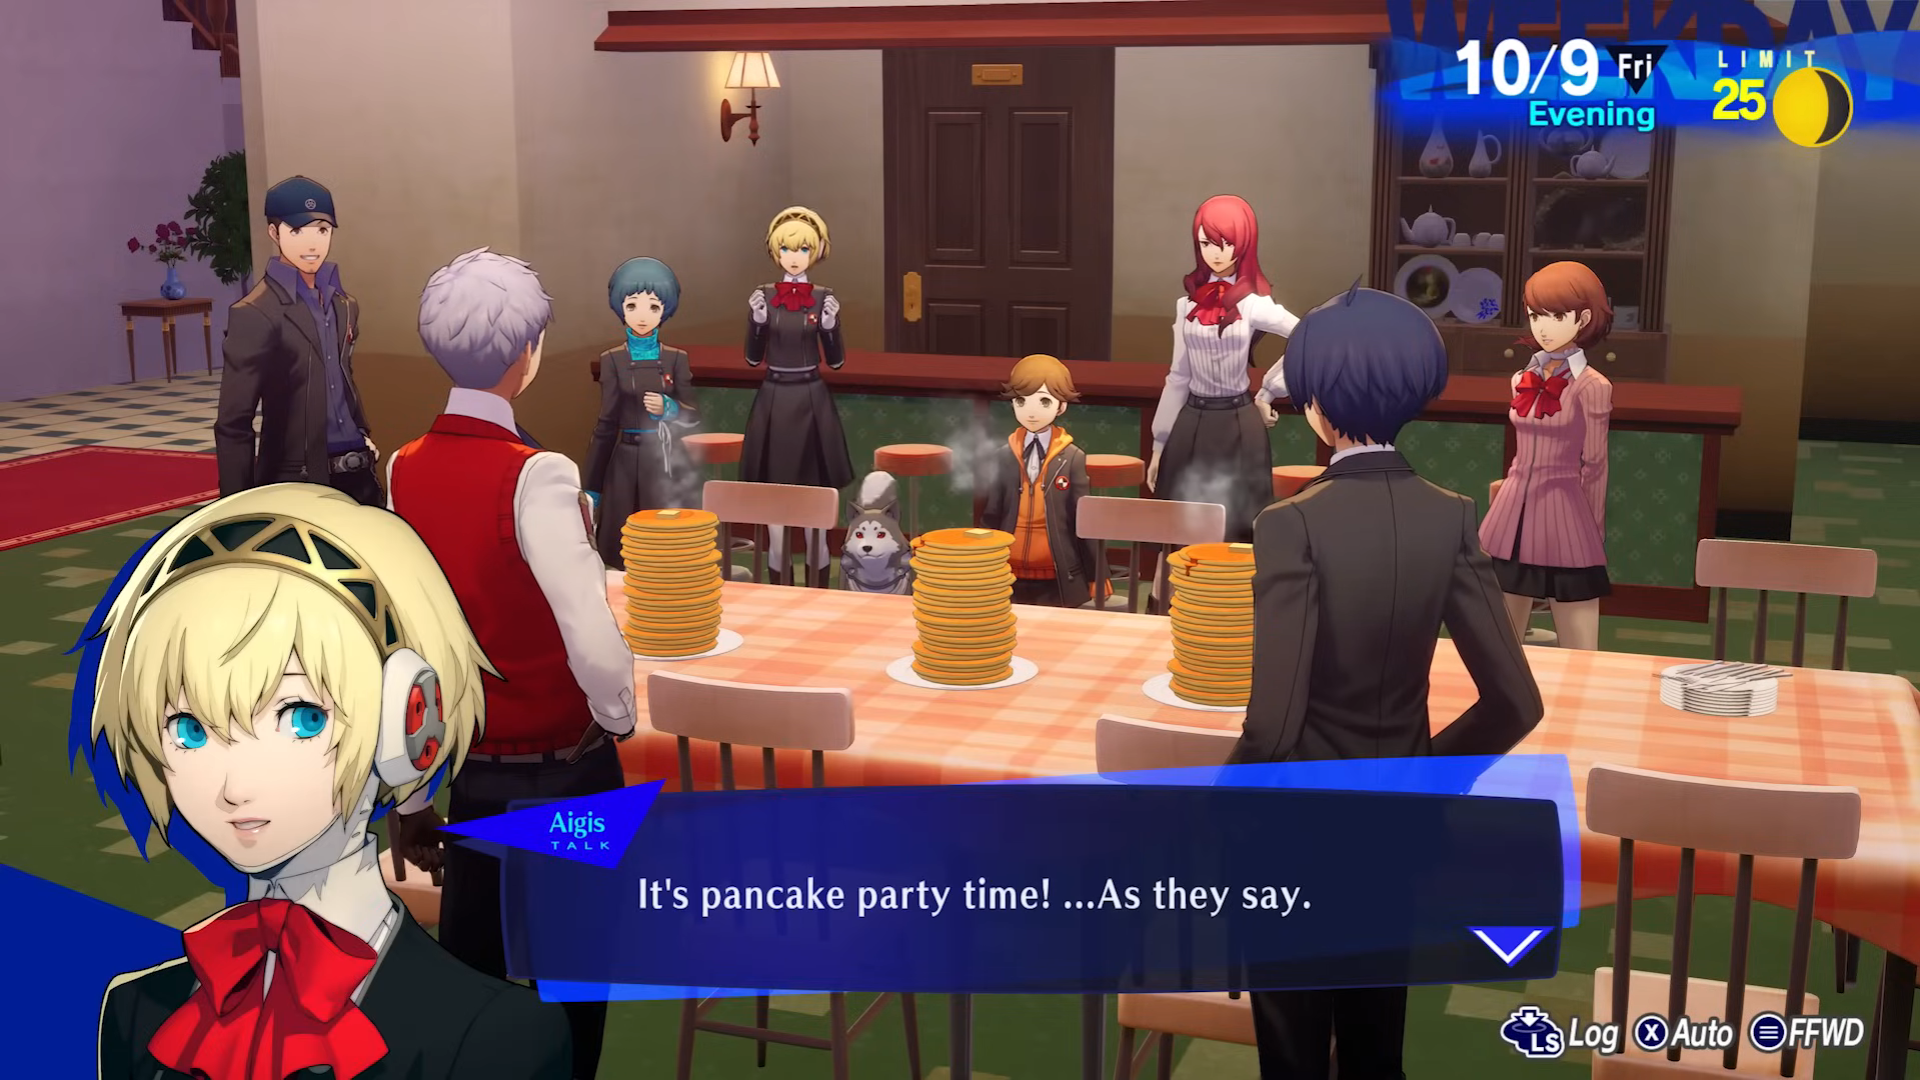 Persona 3 Reload Shares Behind-the-Scenes Video Featuring Original English Voice Cast